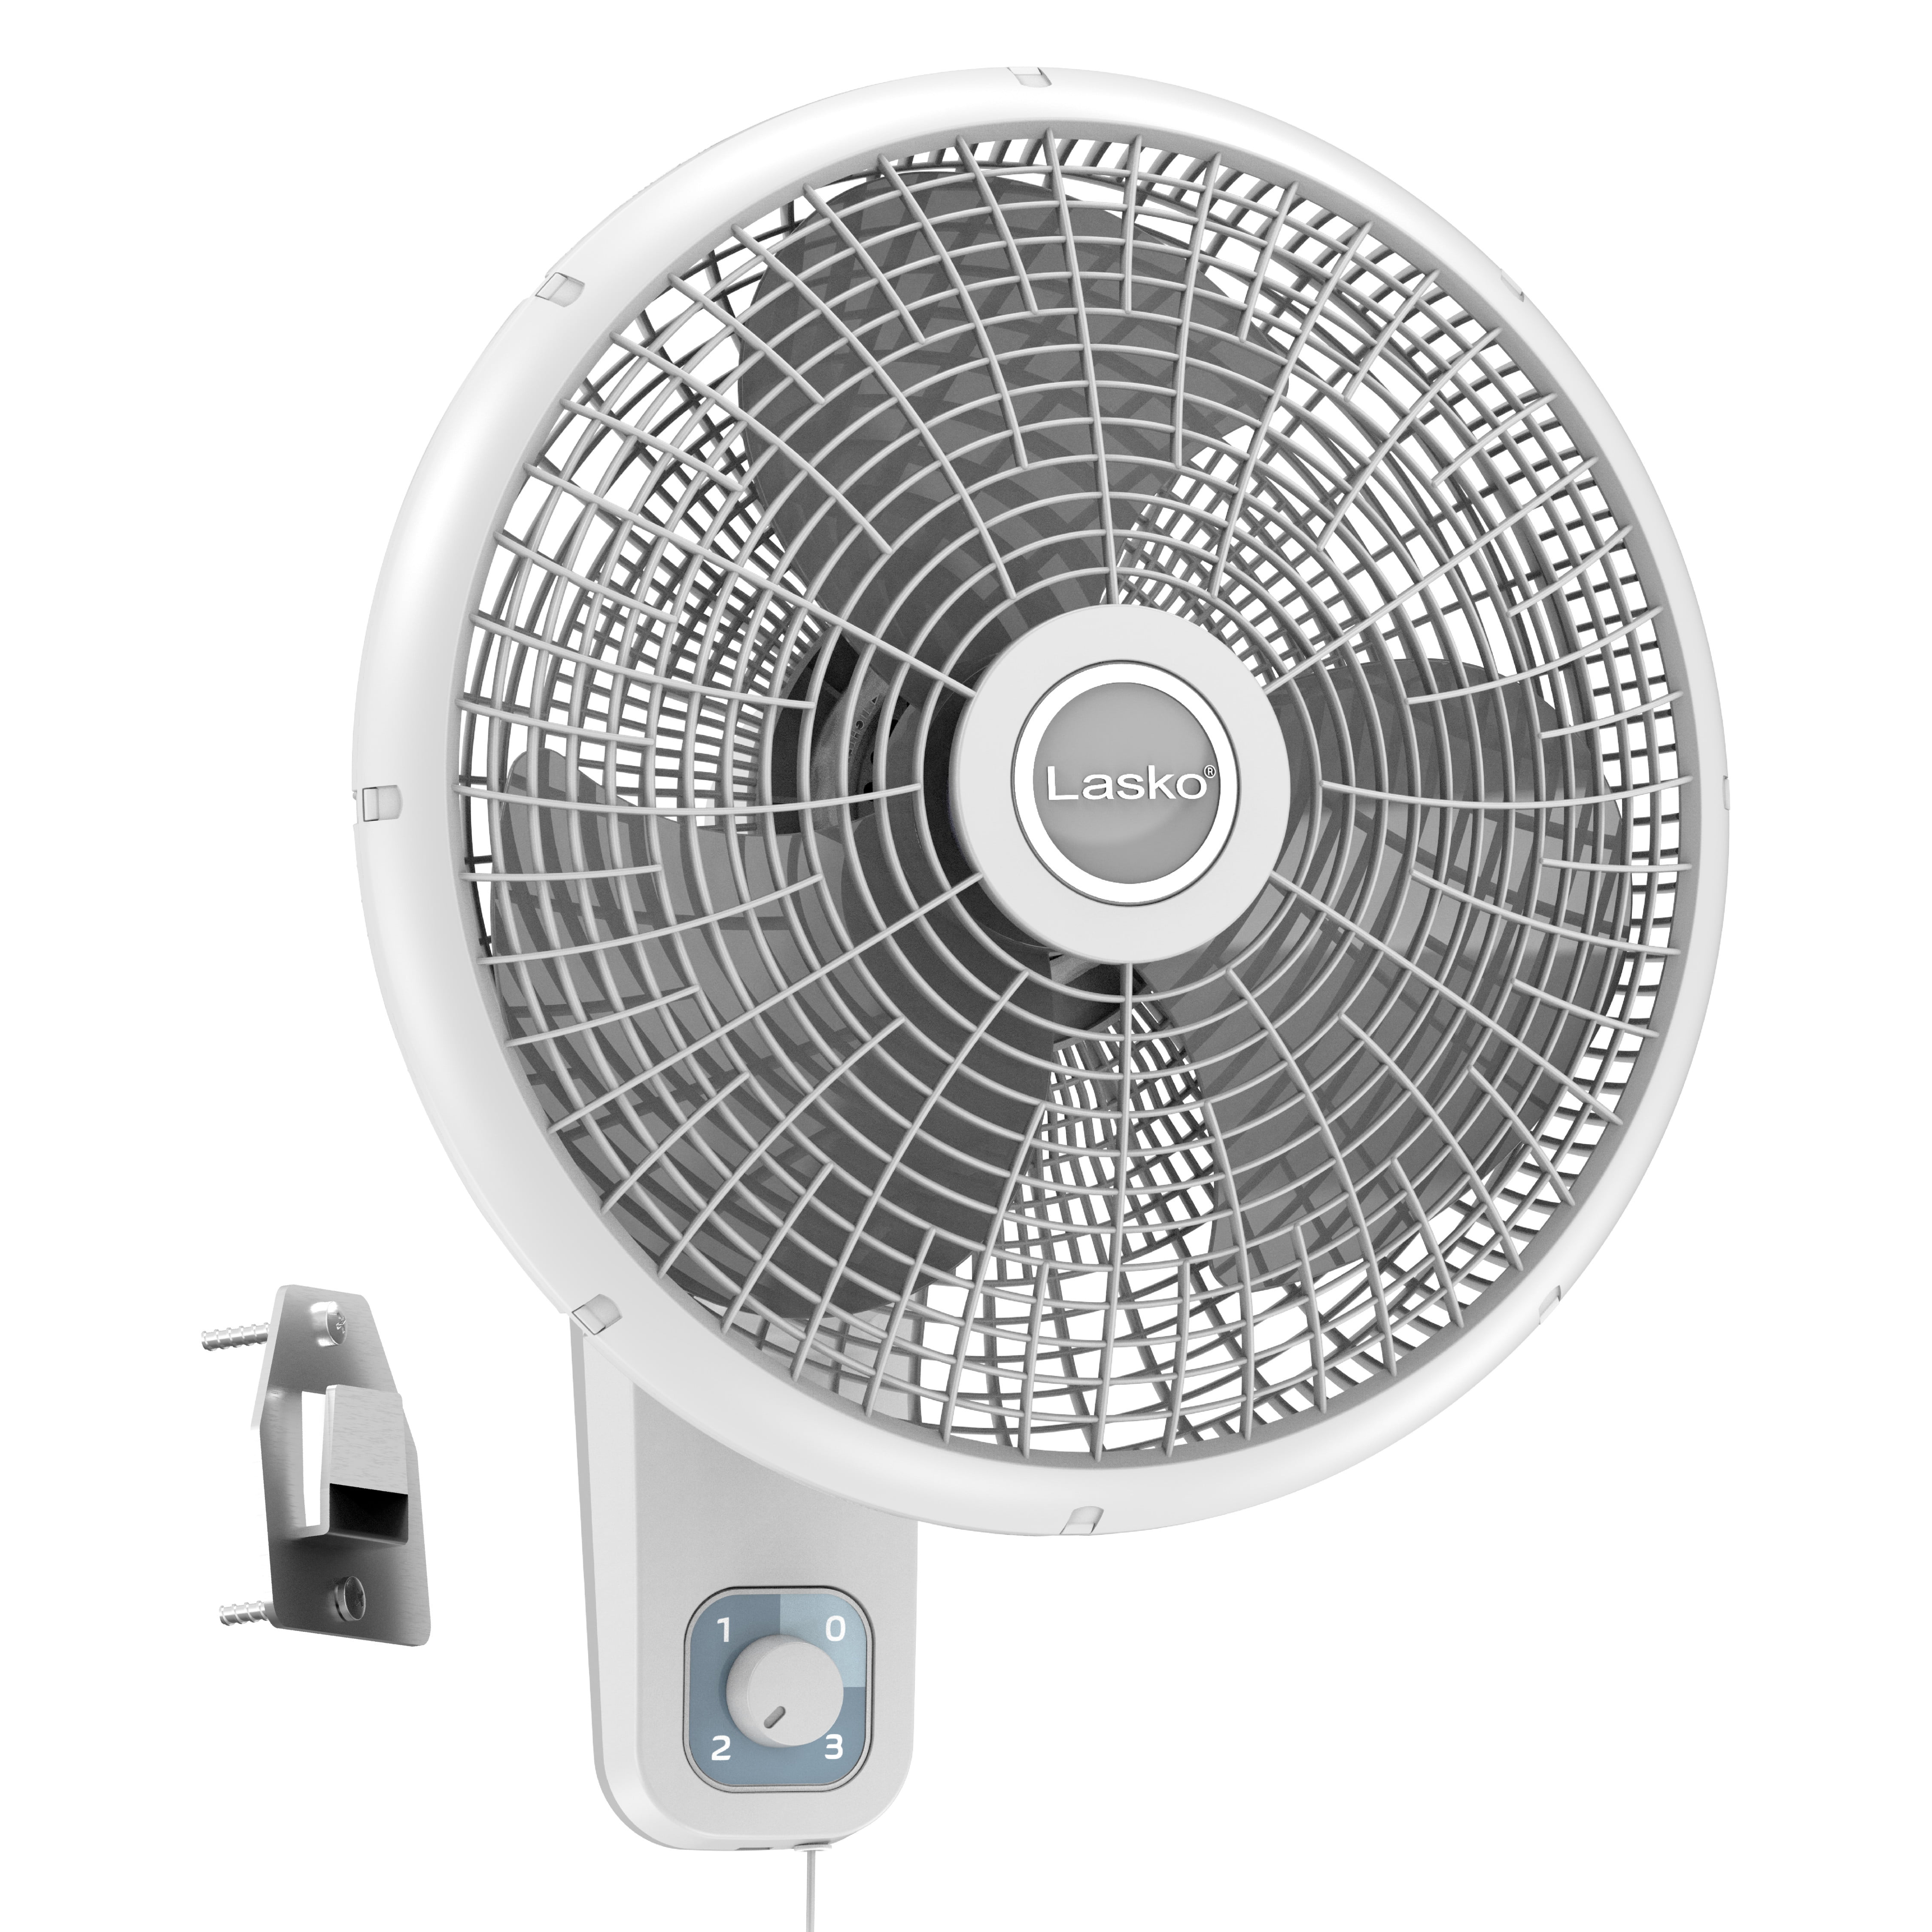 Koovin Wall Fan W/Remote Contro&Timing,Home Quiet Wall Mount Fan W/90°Oscillating,Commercial/Residential 